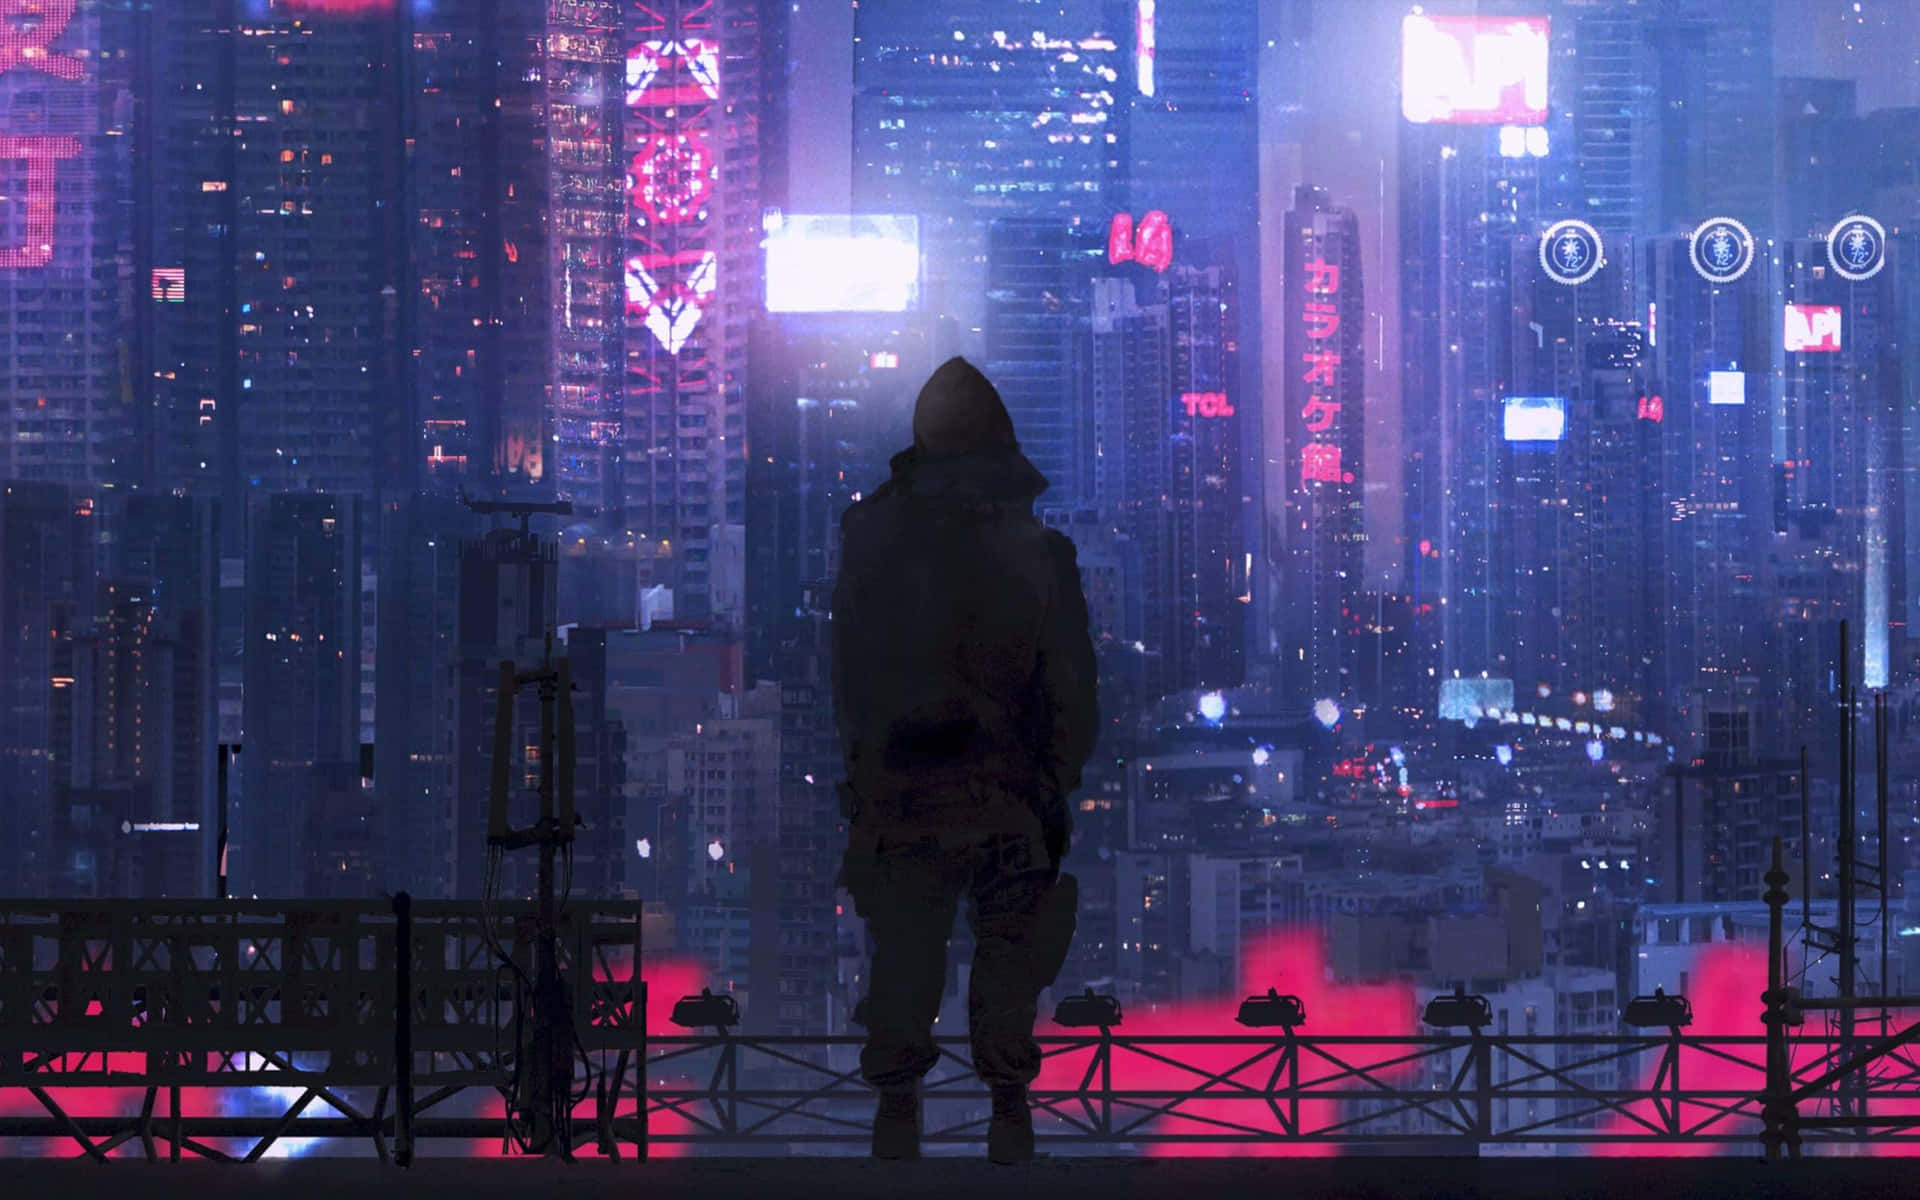 Take your tech to the future with this futuristic Cyberpunk Laptop Wallpaper